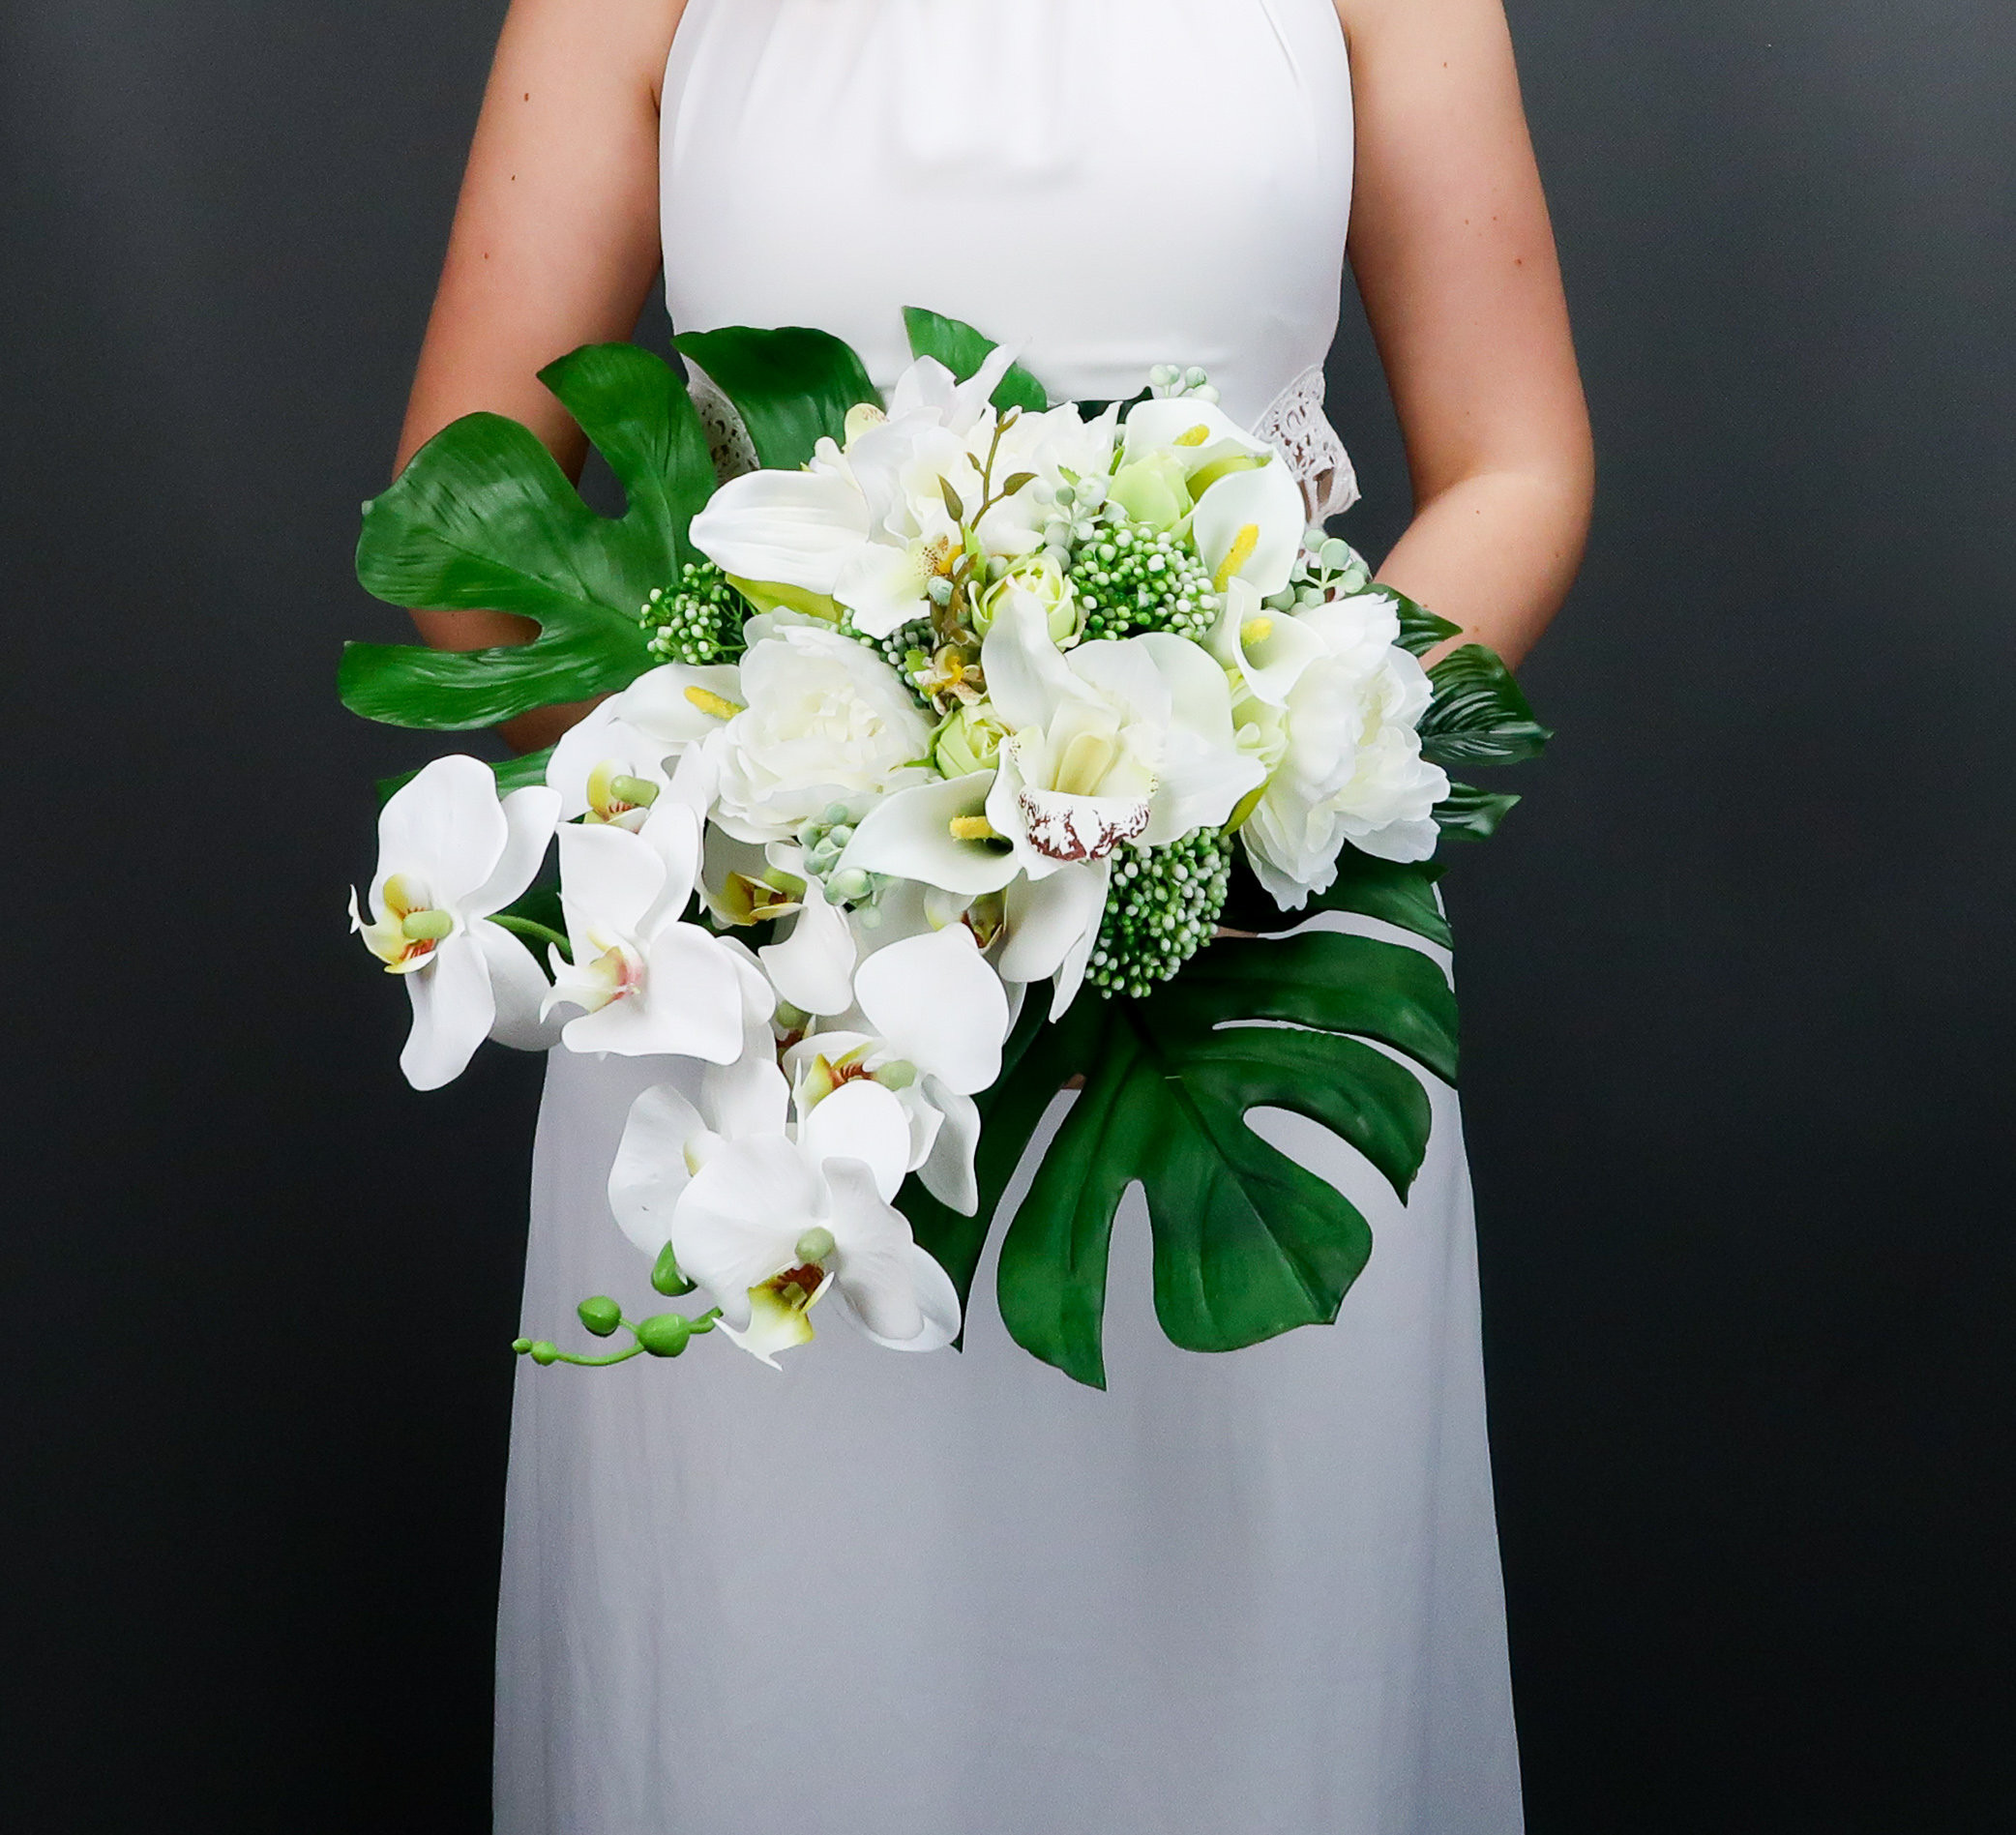 Hawaiian Wedding Flowers
 Tropical wedding bouquet with white orchids and greenery